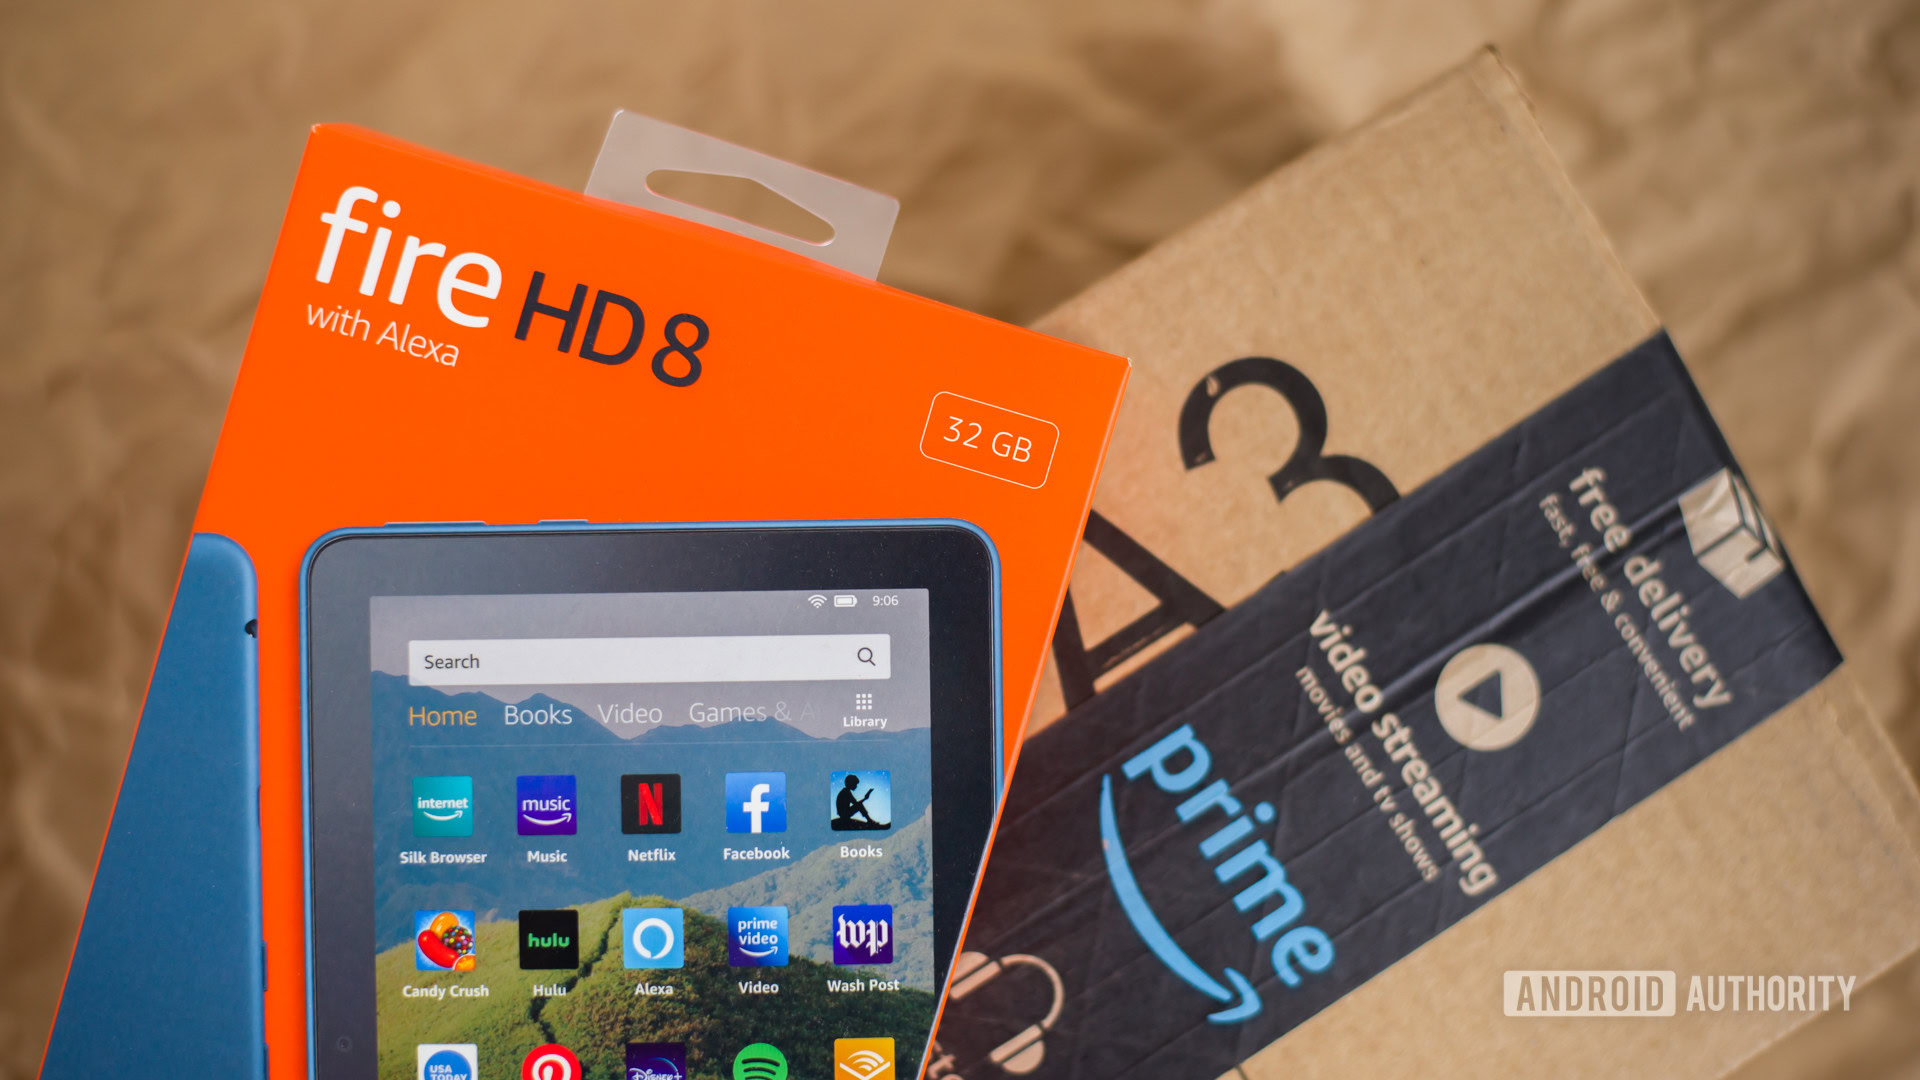 https://www.androidauthority.com/wp-content/uploads/2020/06/2020-Amazon-Fire-HD-8-review-photos-1.jpg